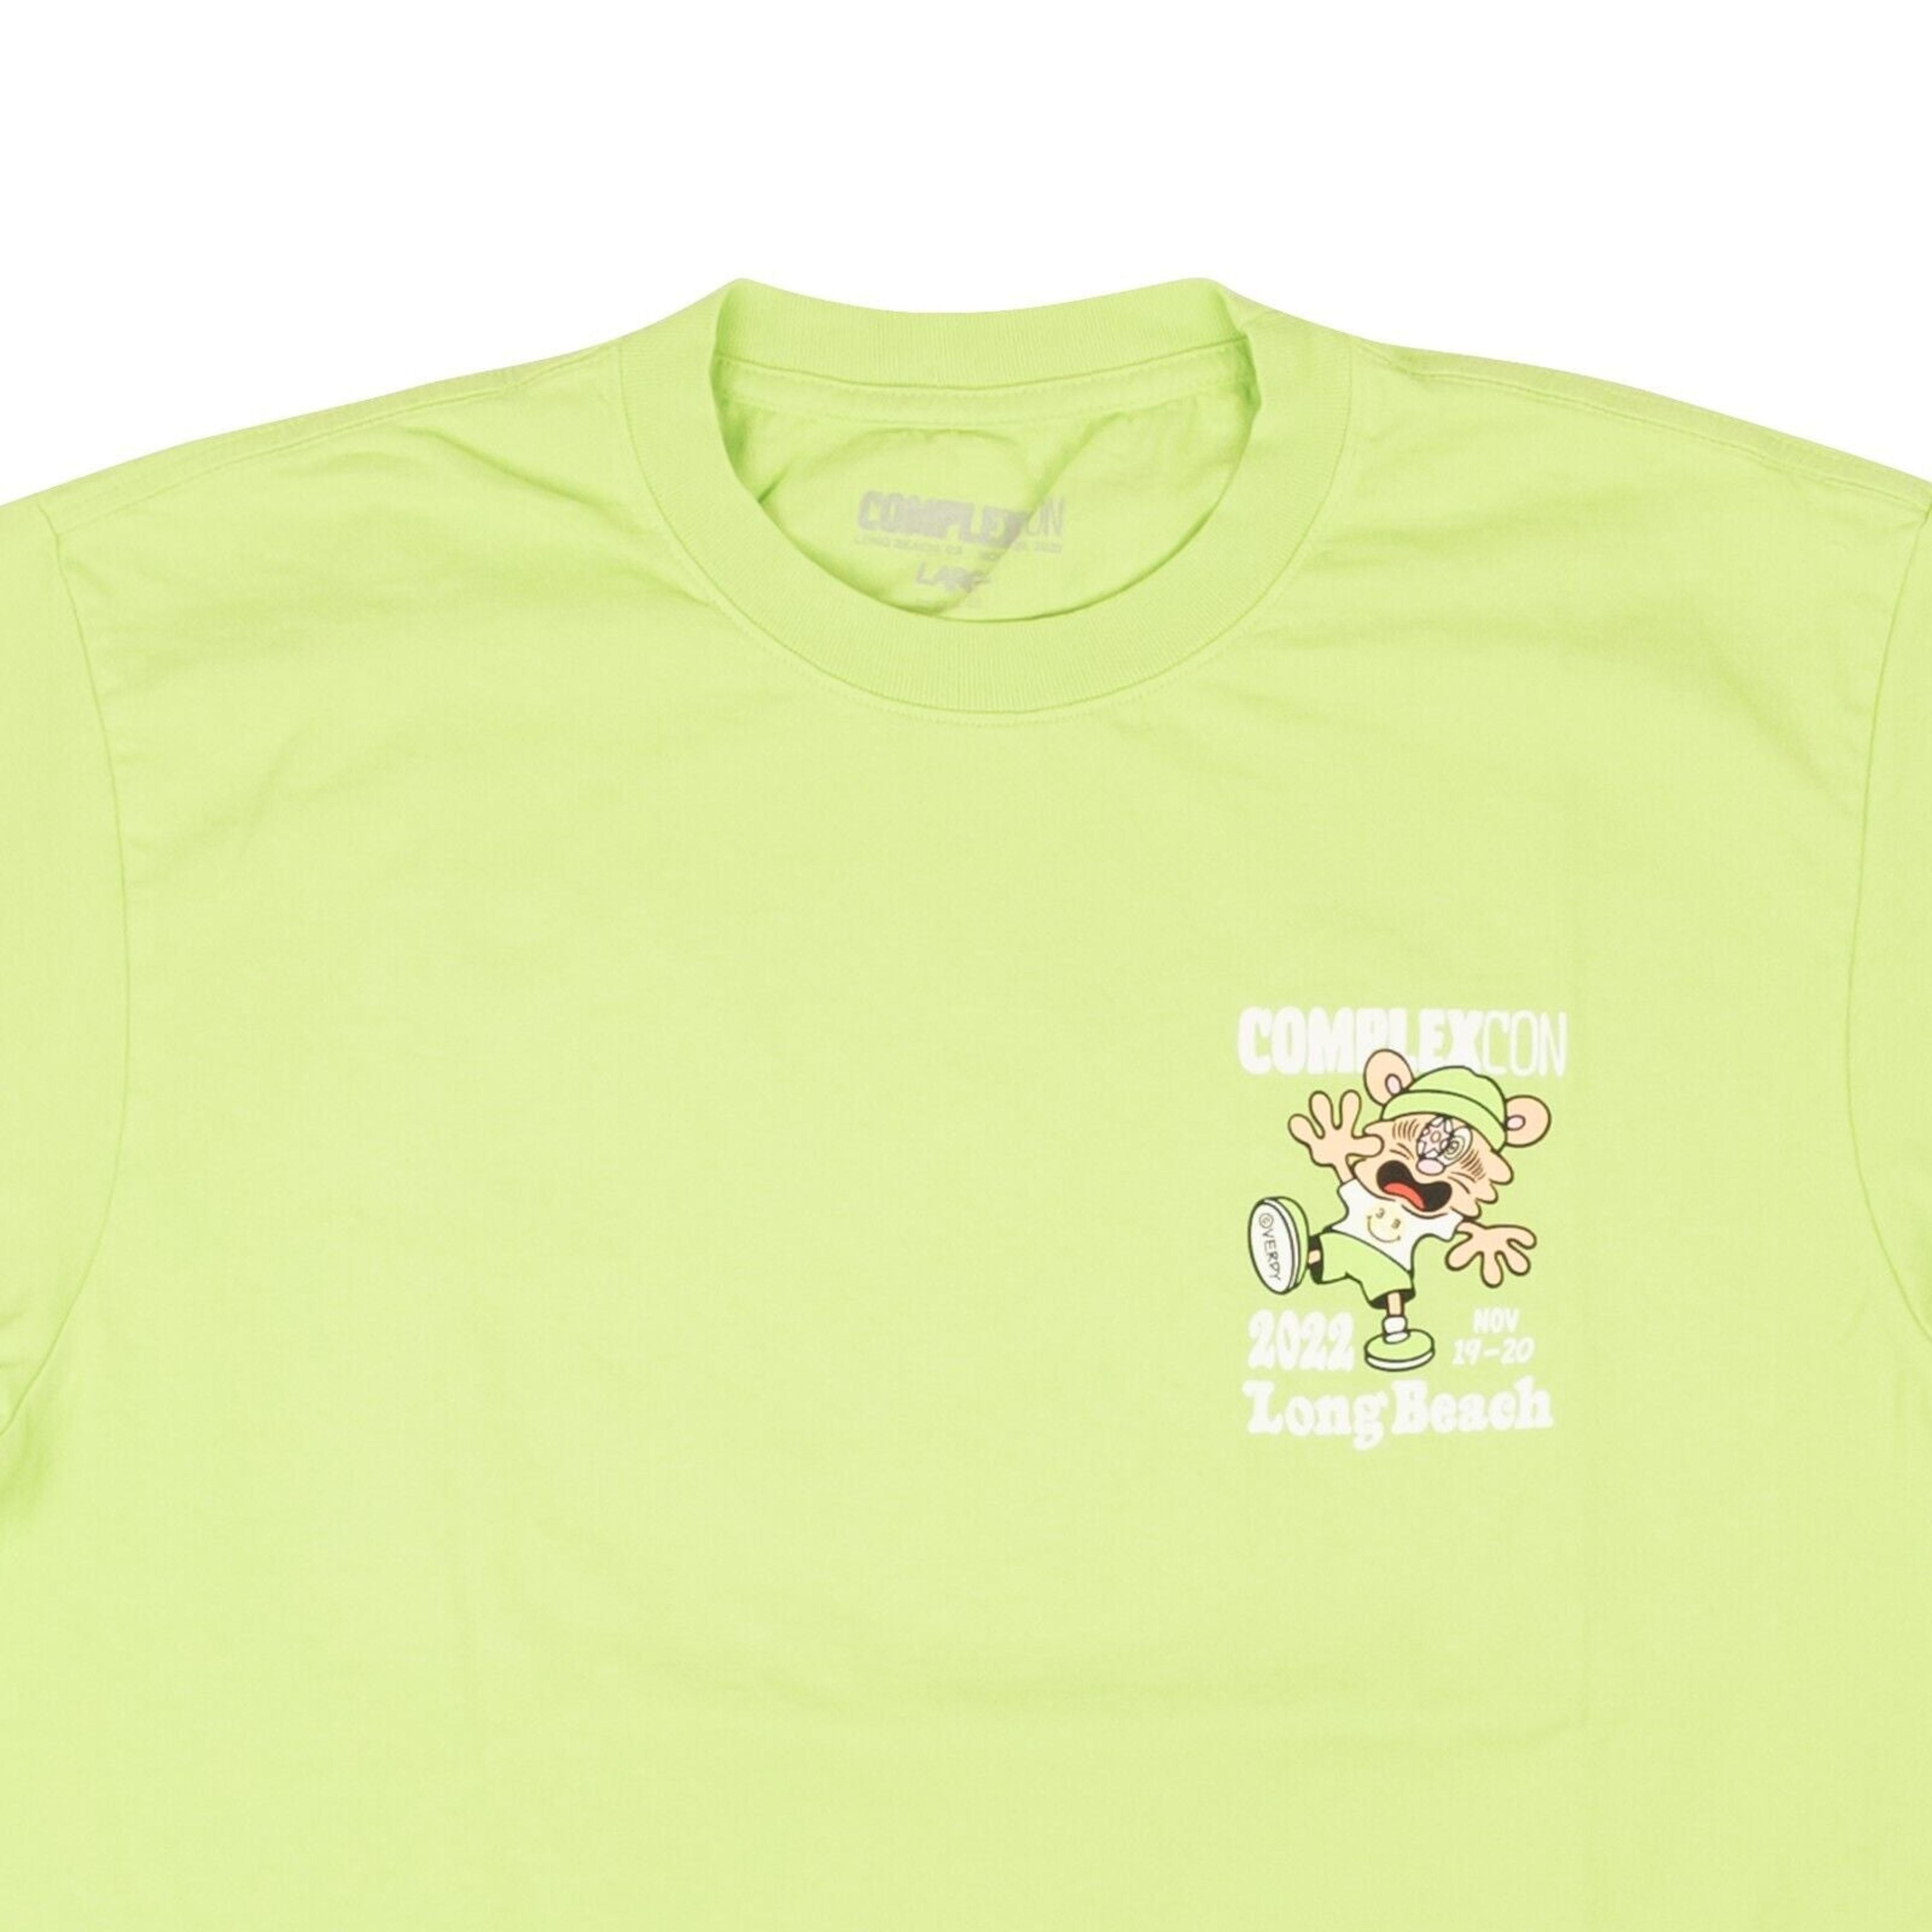 Alternate View 1 of Green Cotton Logo Graphic T-Shirt